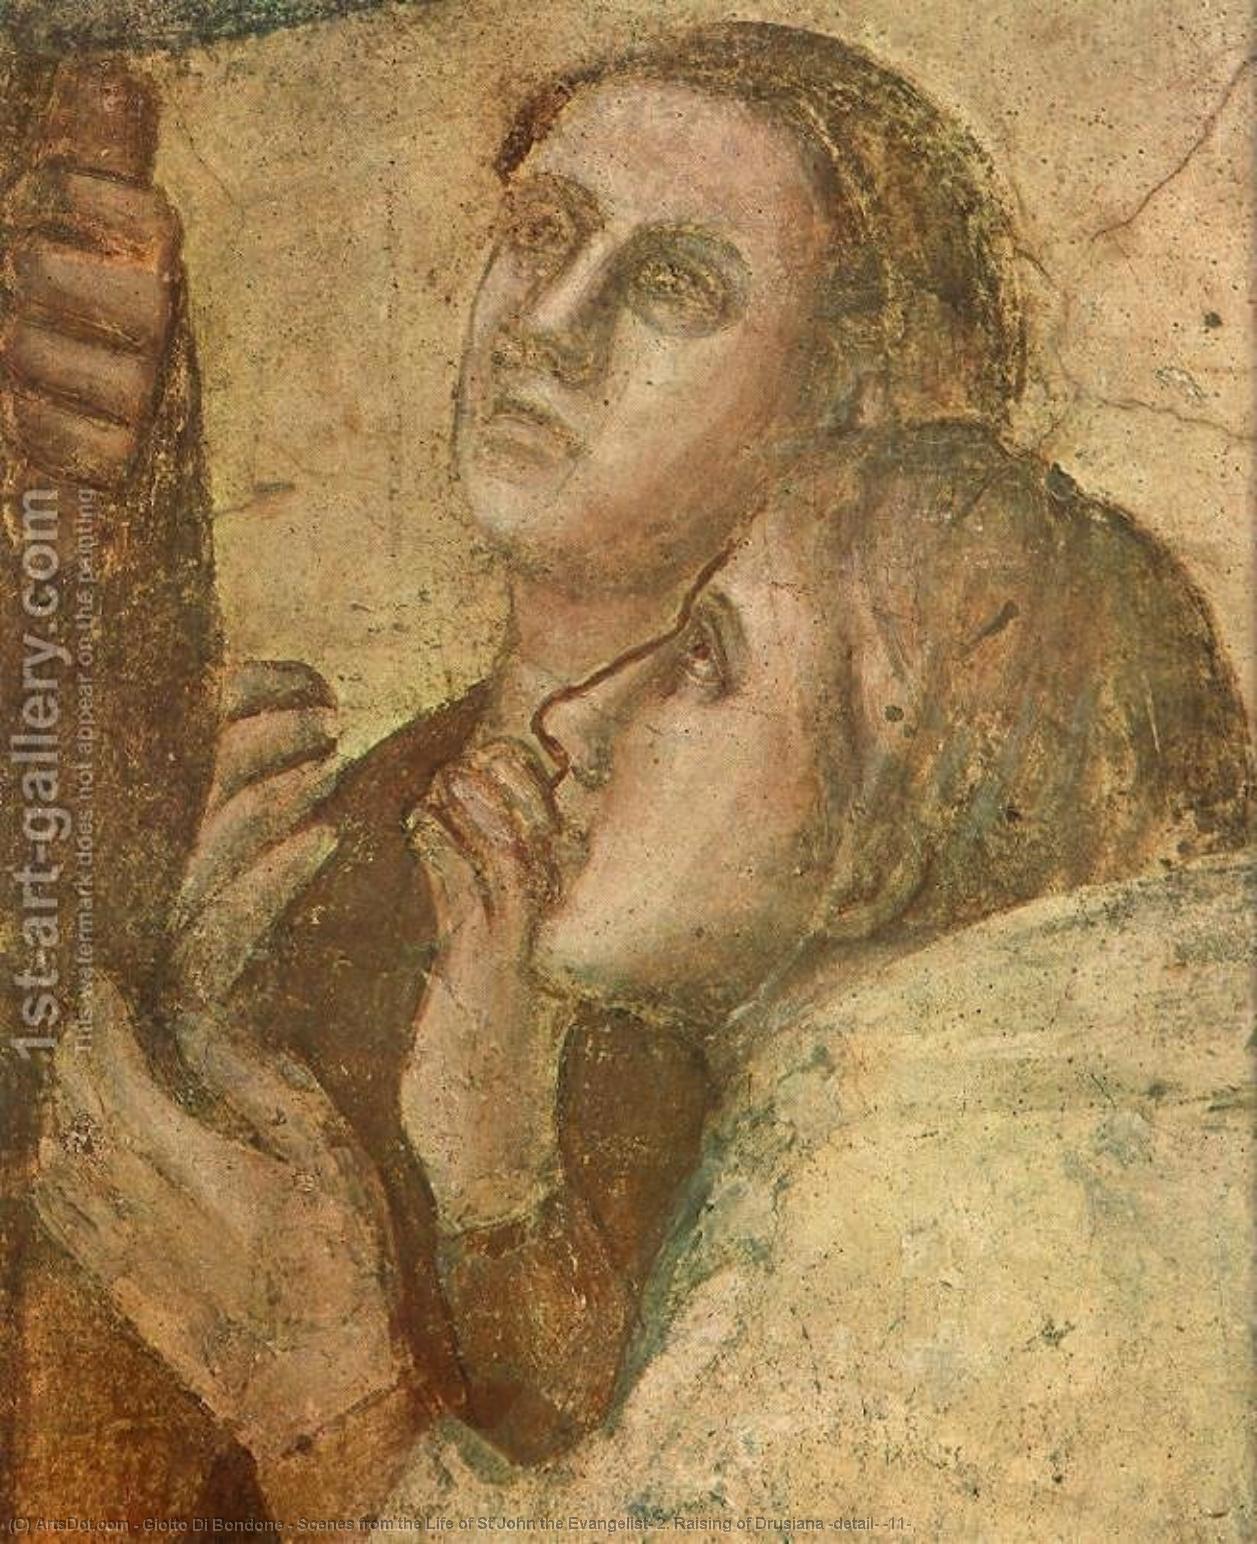 WikiOO.org - 백과 사전 - 회화, 삽화 Giotto Di Bondone - Scenes from the Life of St John the Evangelist: 2. Raising of Drusiana (detail) (11)